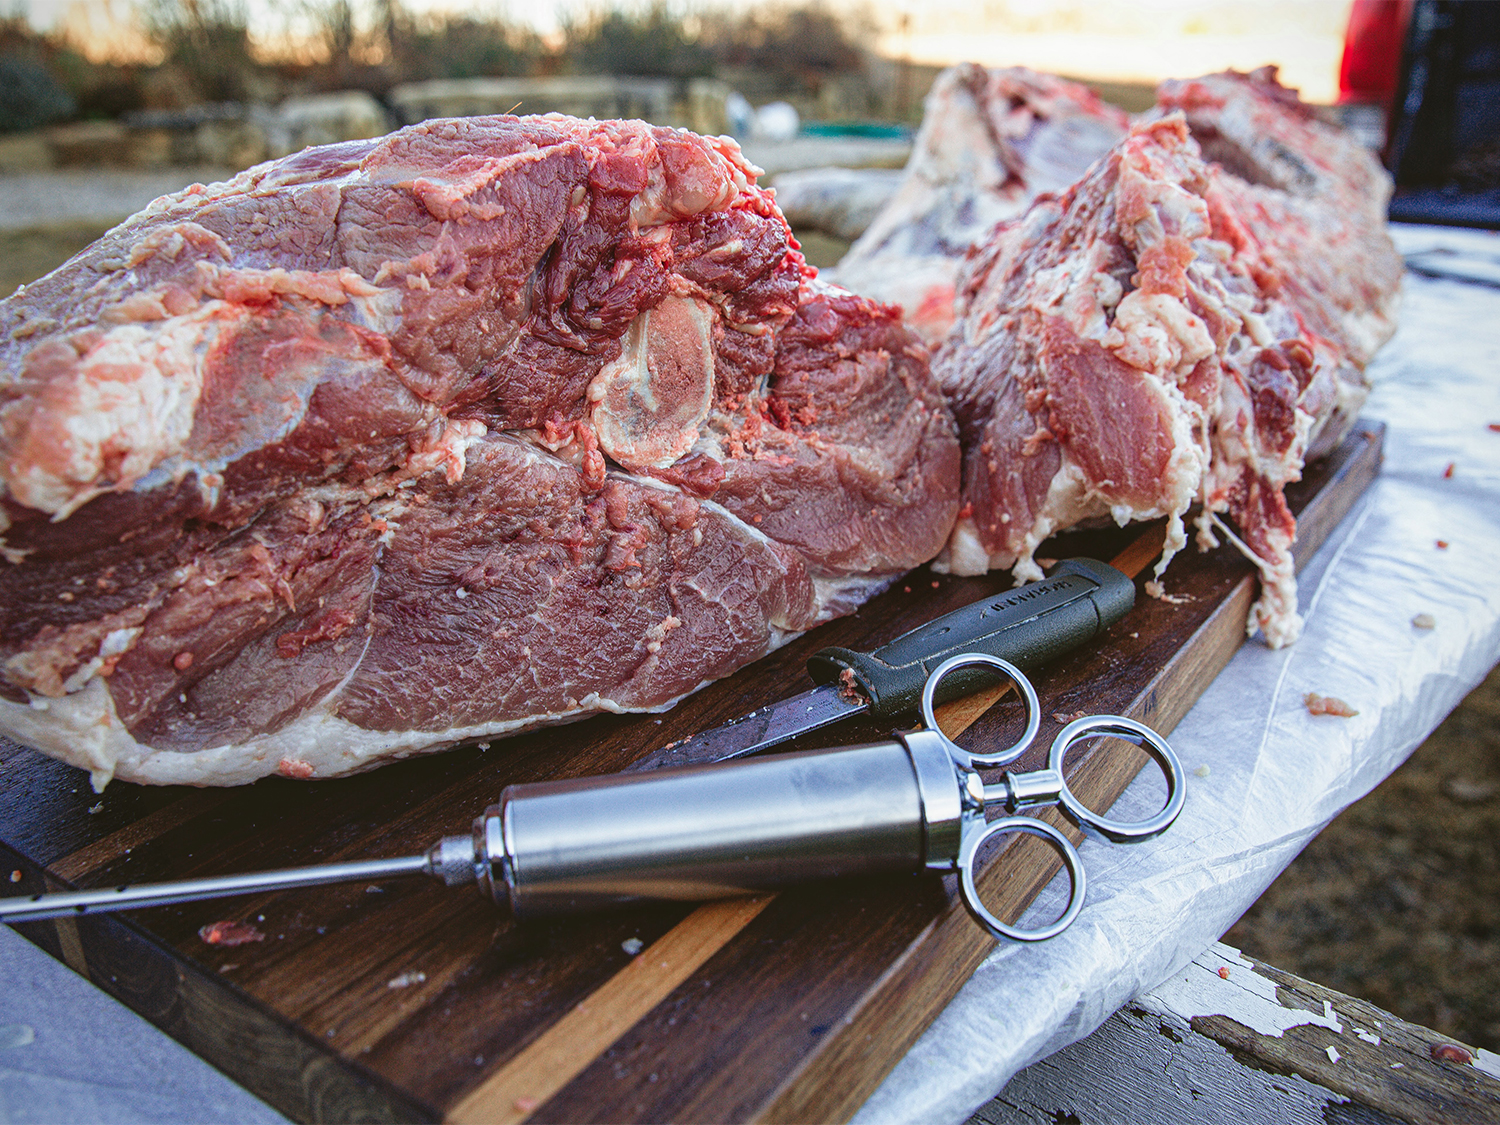 Slabs of wild game meat and a flavor syringe injector.